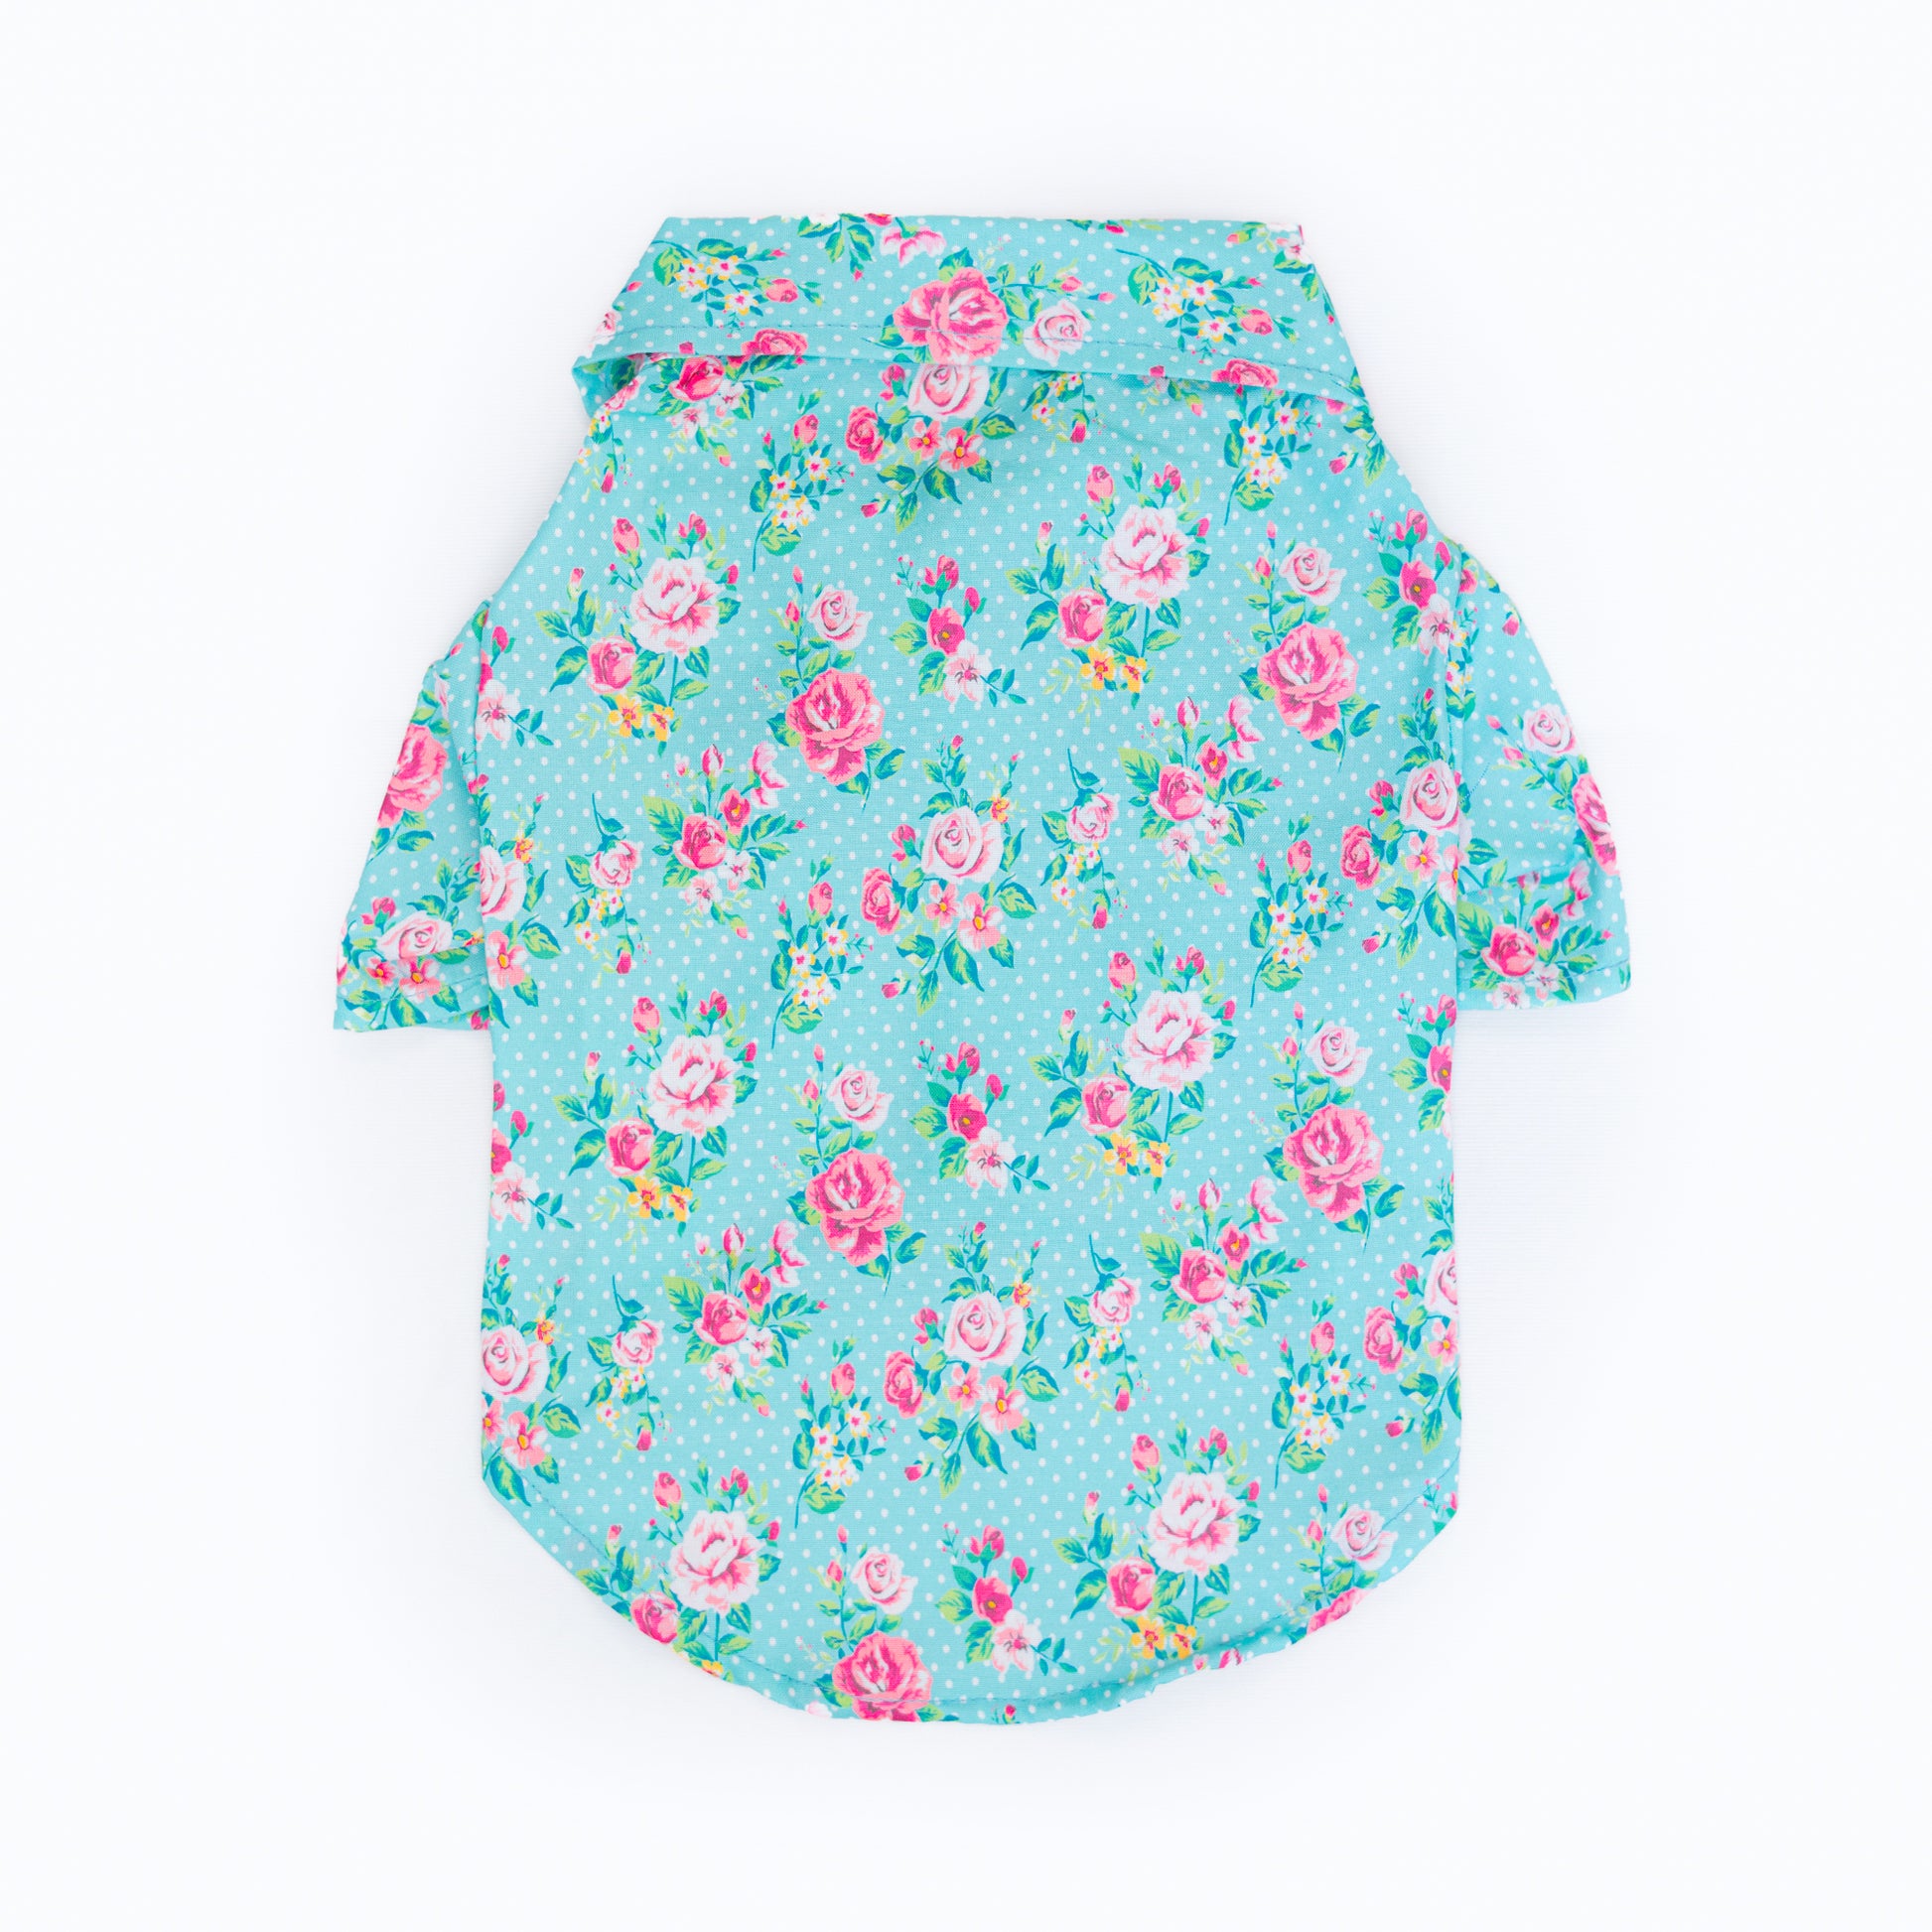 Pawgy Pets Floral Shirt Blue for Dogs